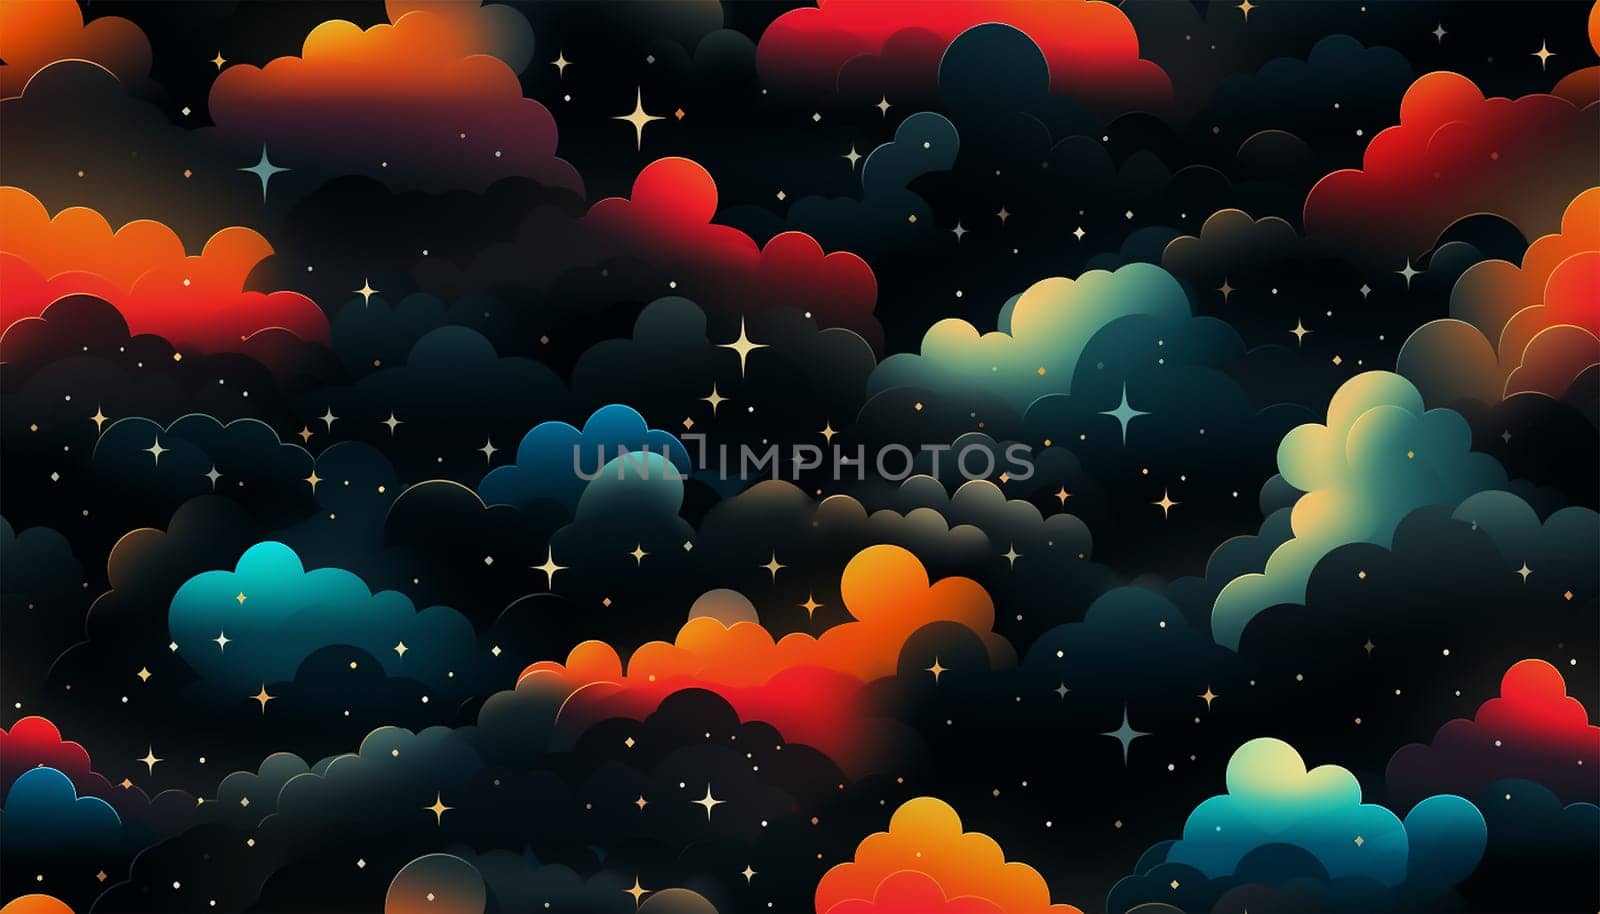 Cute night sky background with colorful clouds. dark blue seamless pattern with gold foil constellations, stars and clouds. Watercolor night sky background Dreamy design copy space